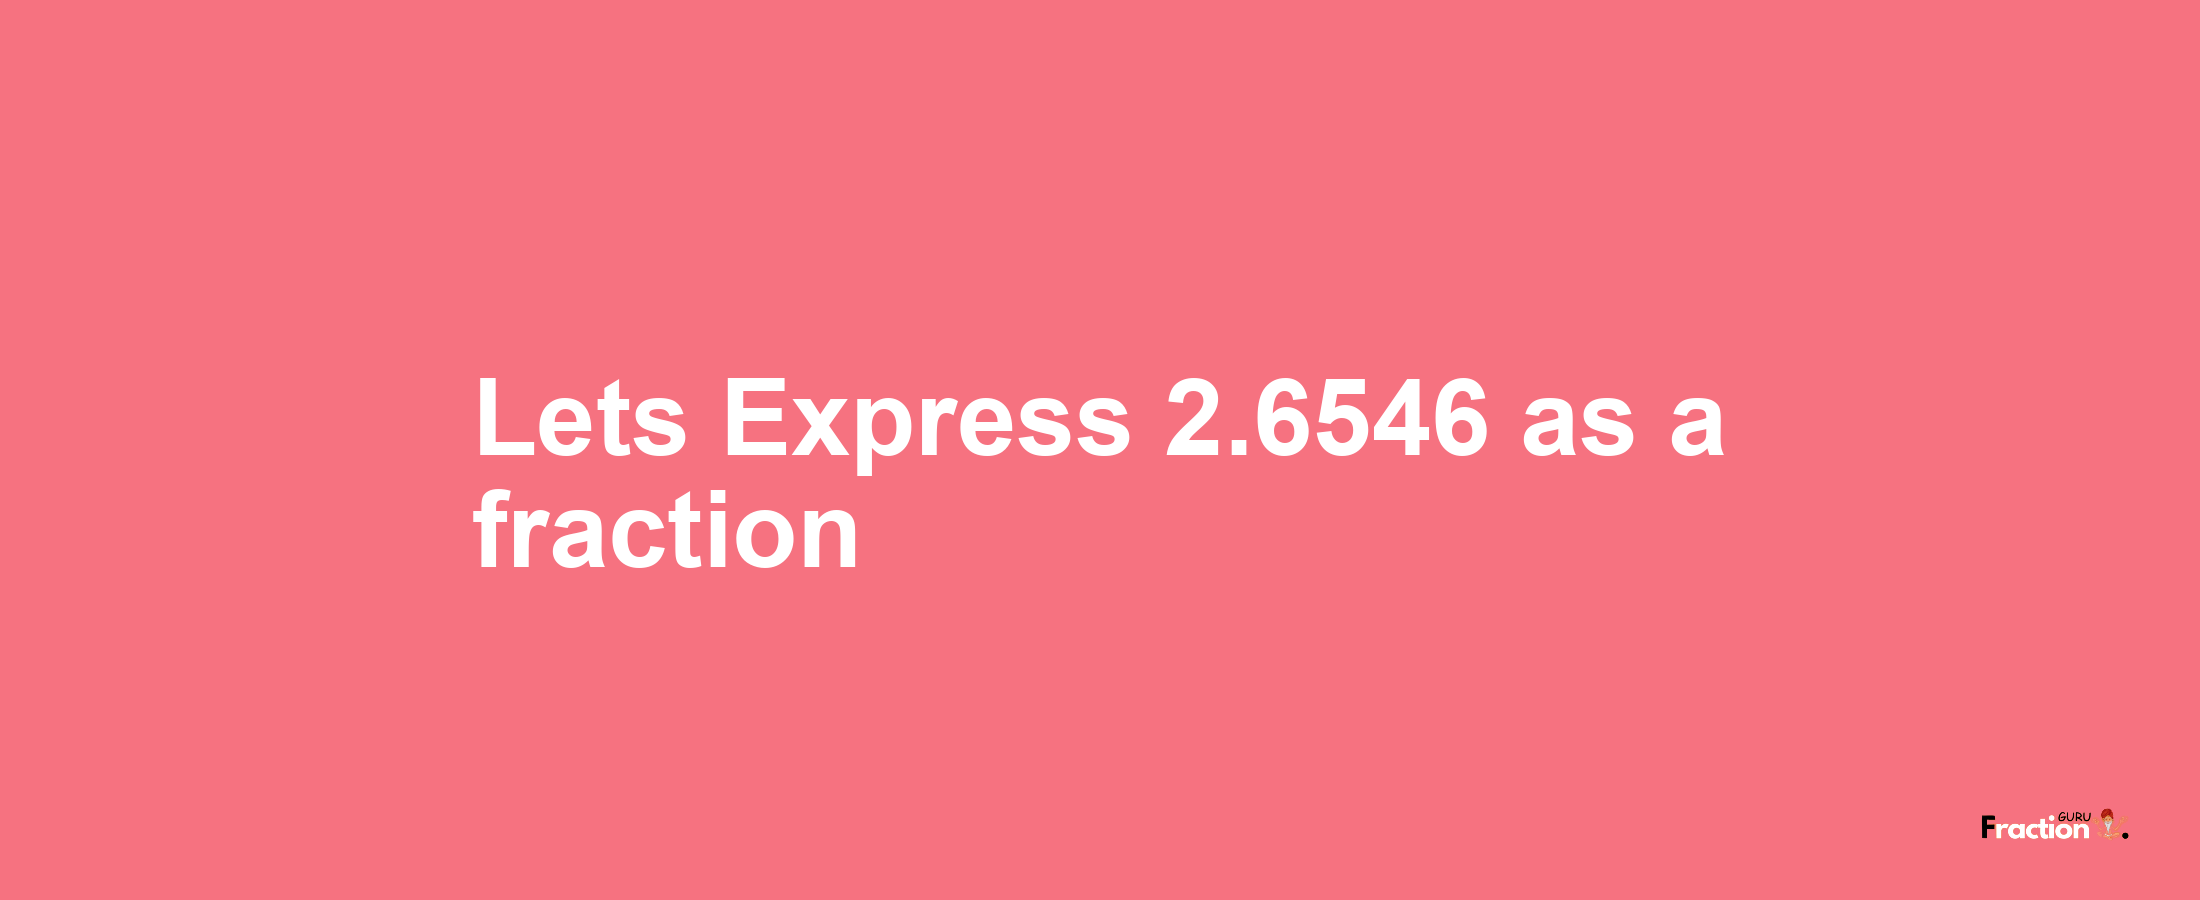 Lets Express 2.6546 as afraction